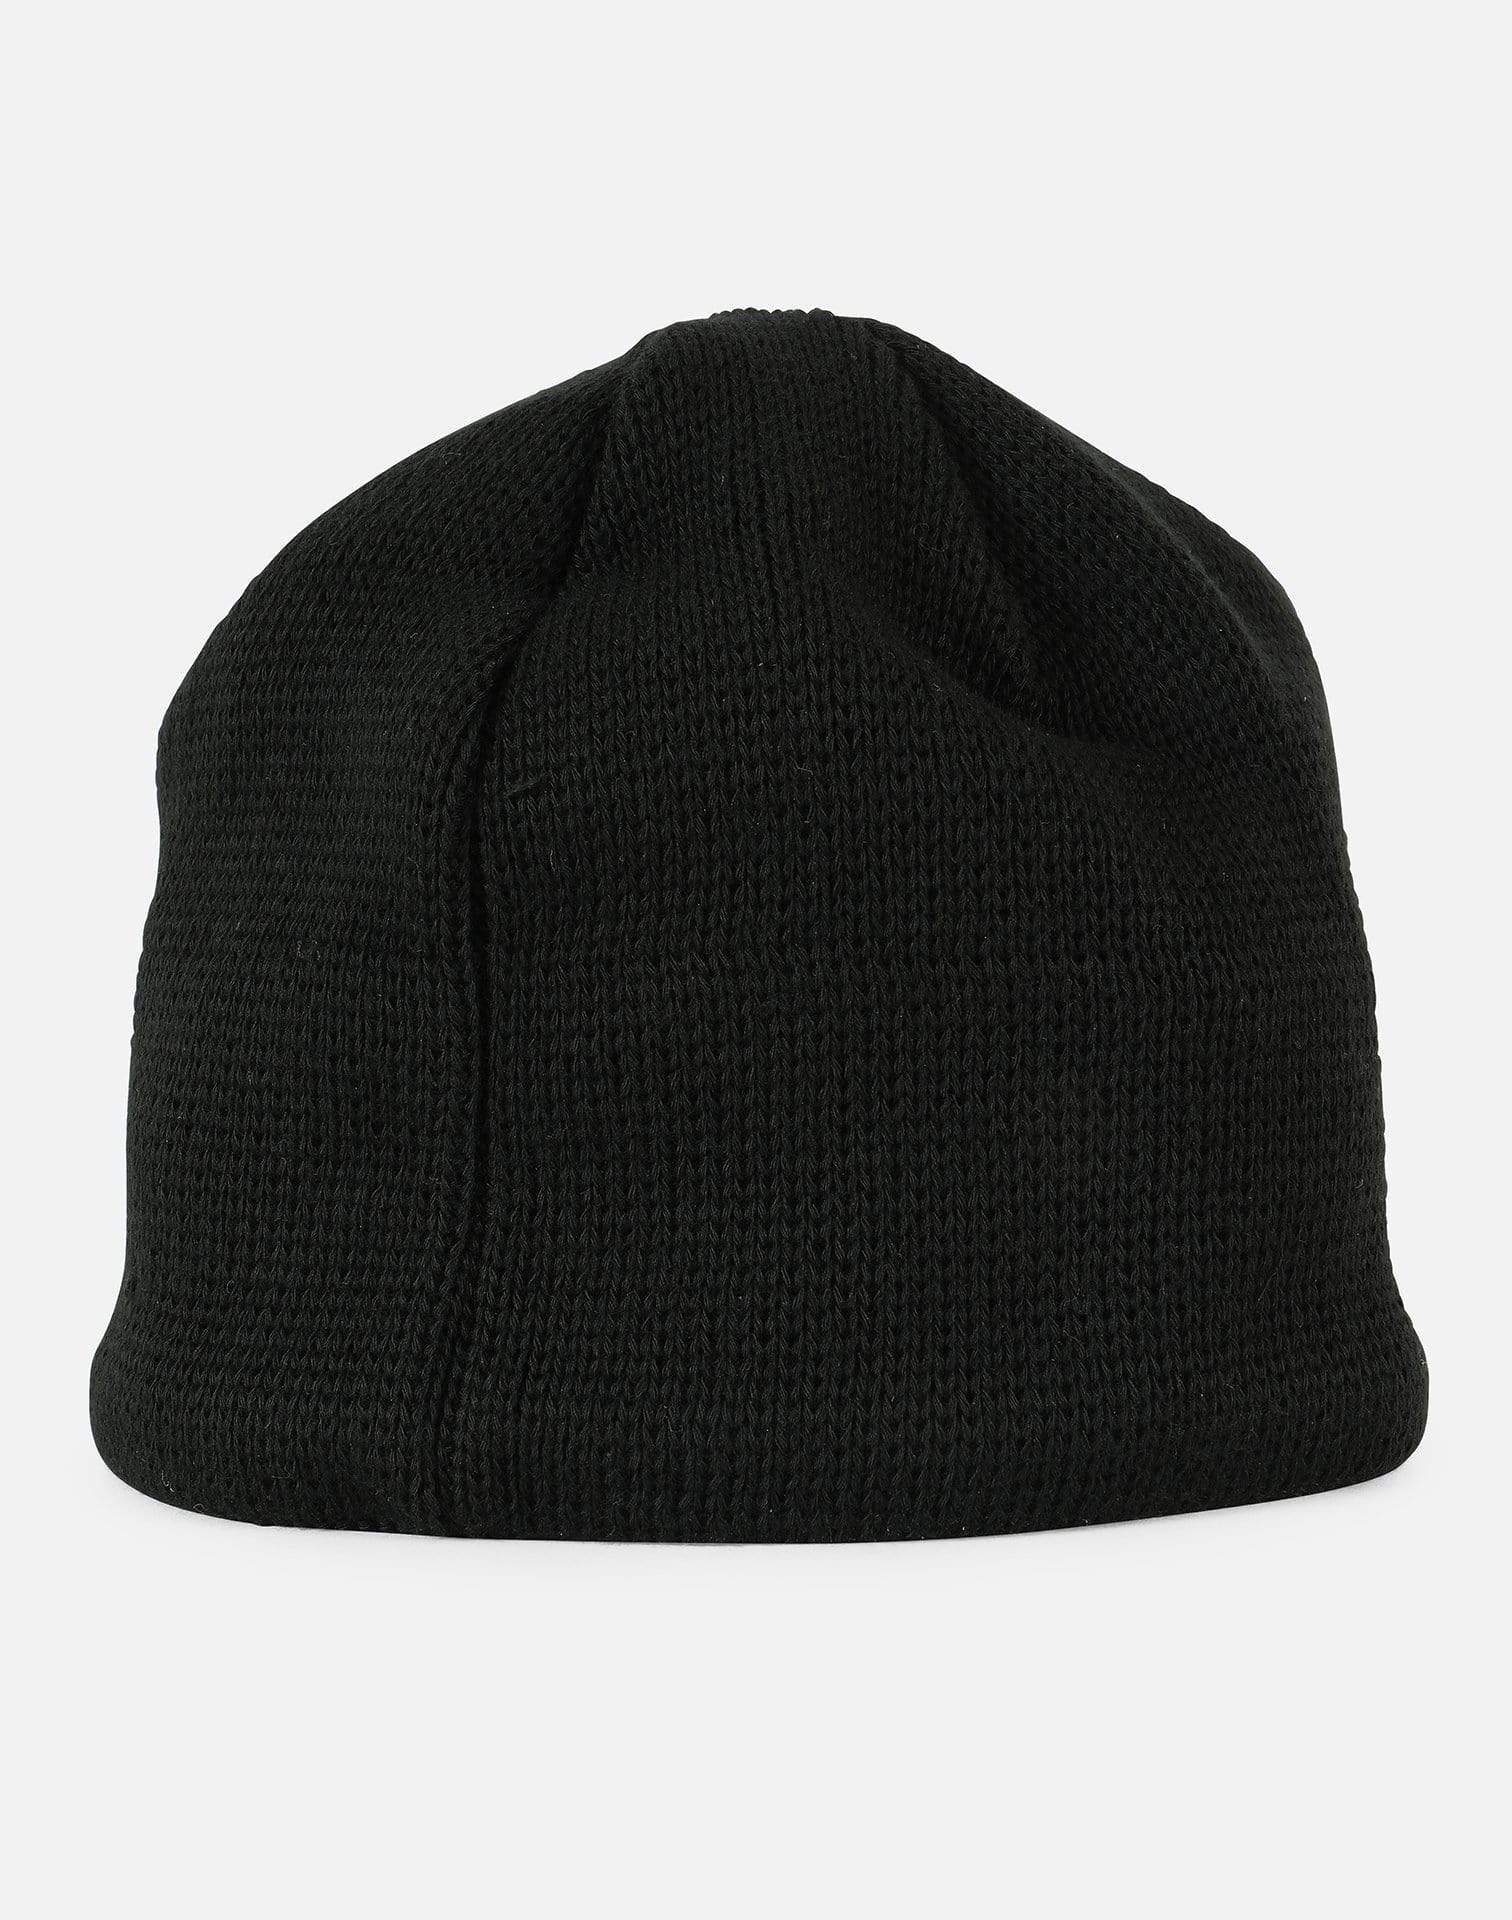 The North Face Men's Bones Recycled Beanie